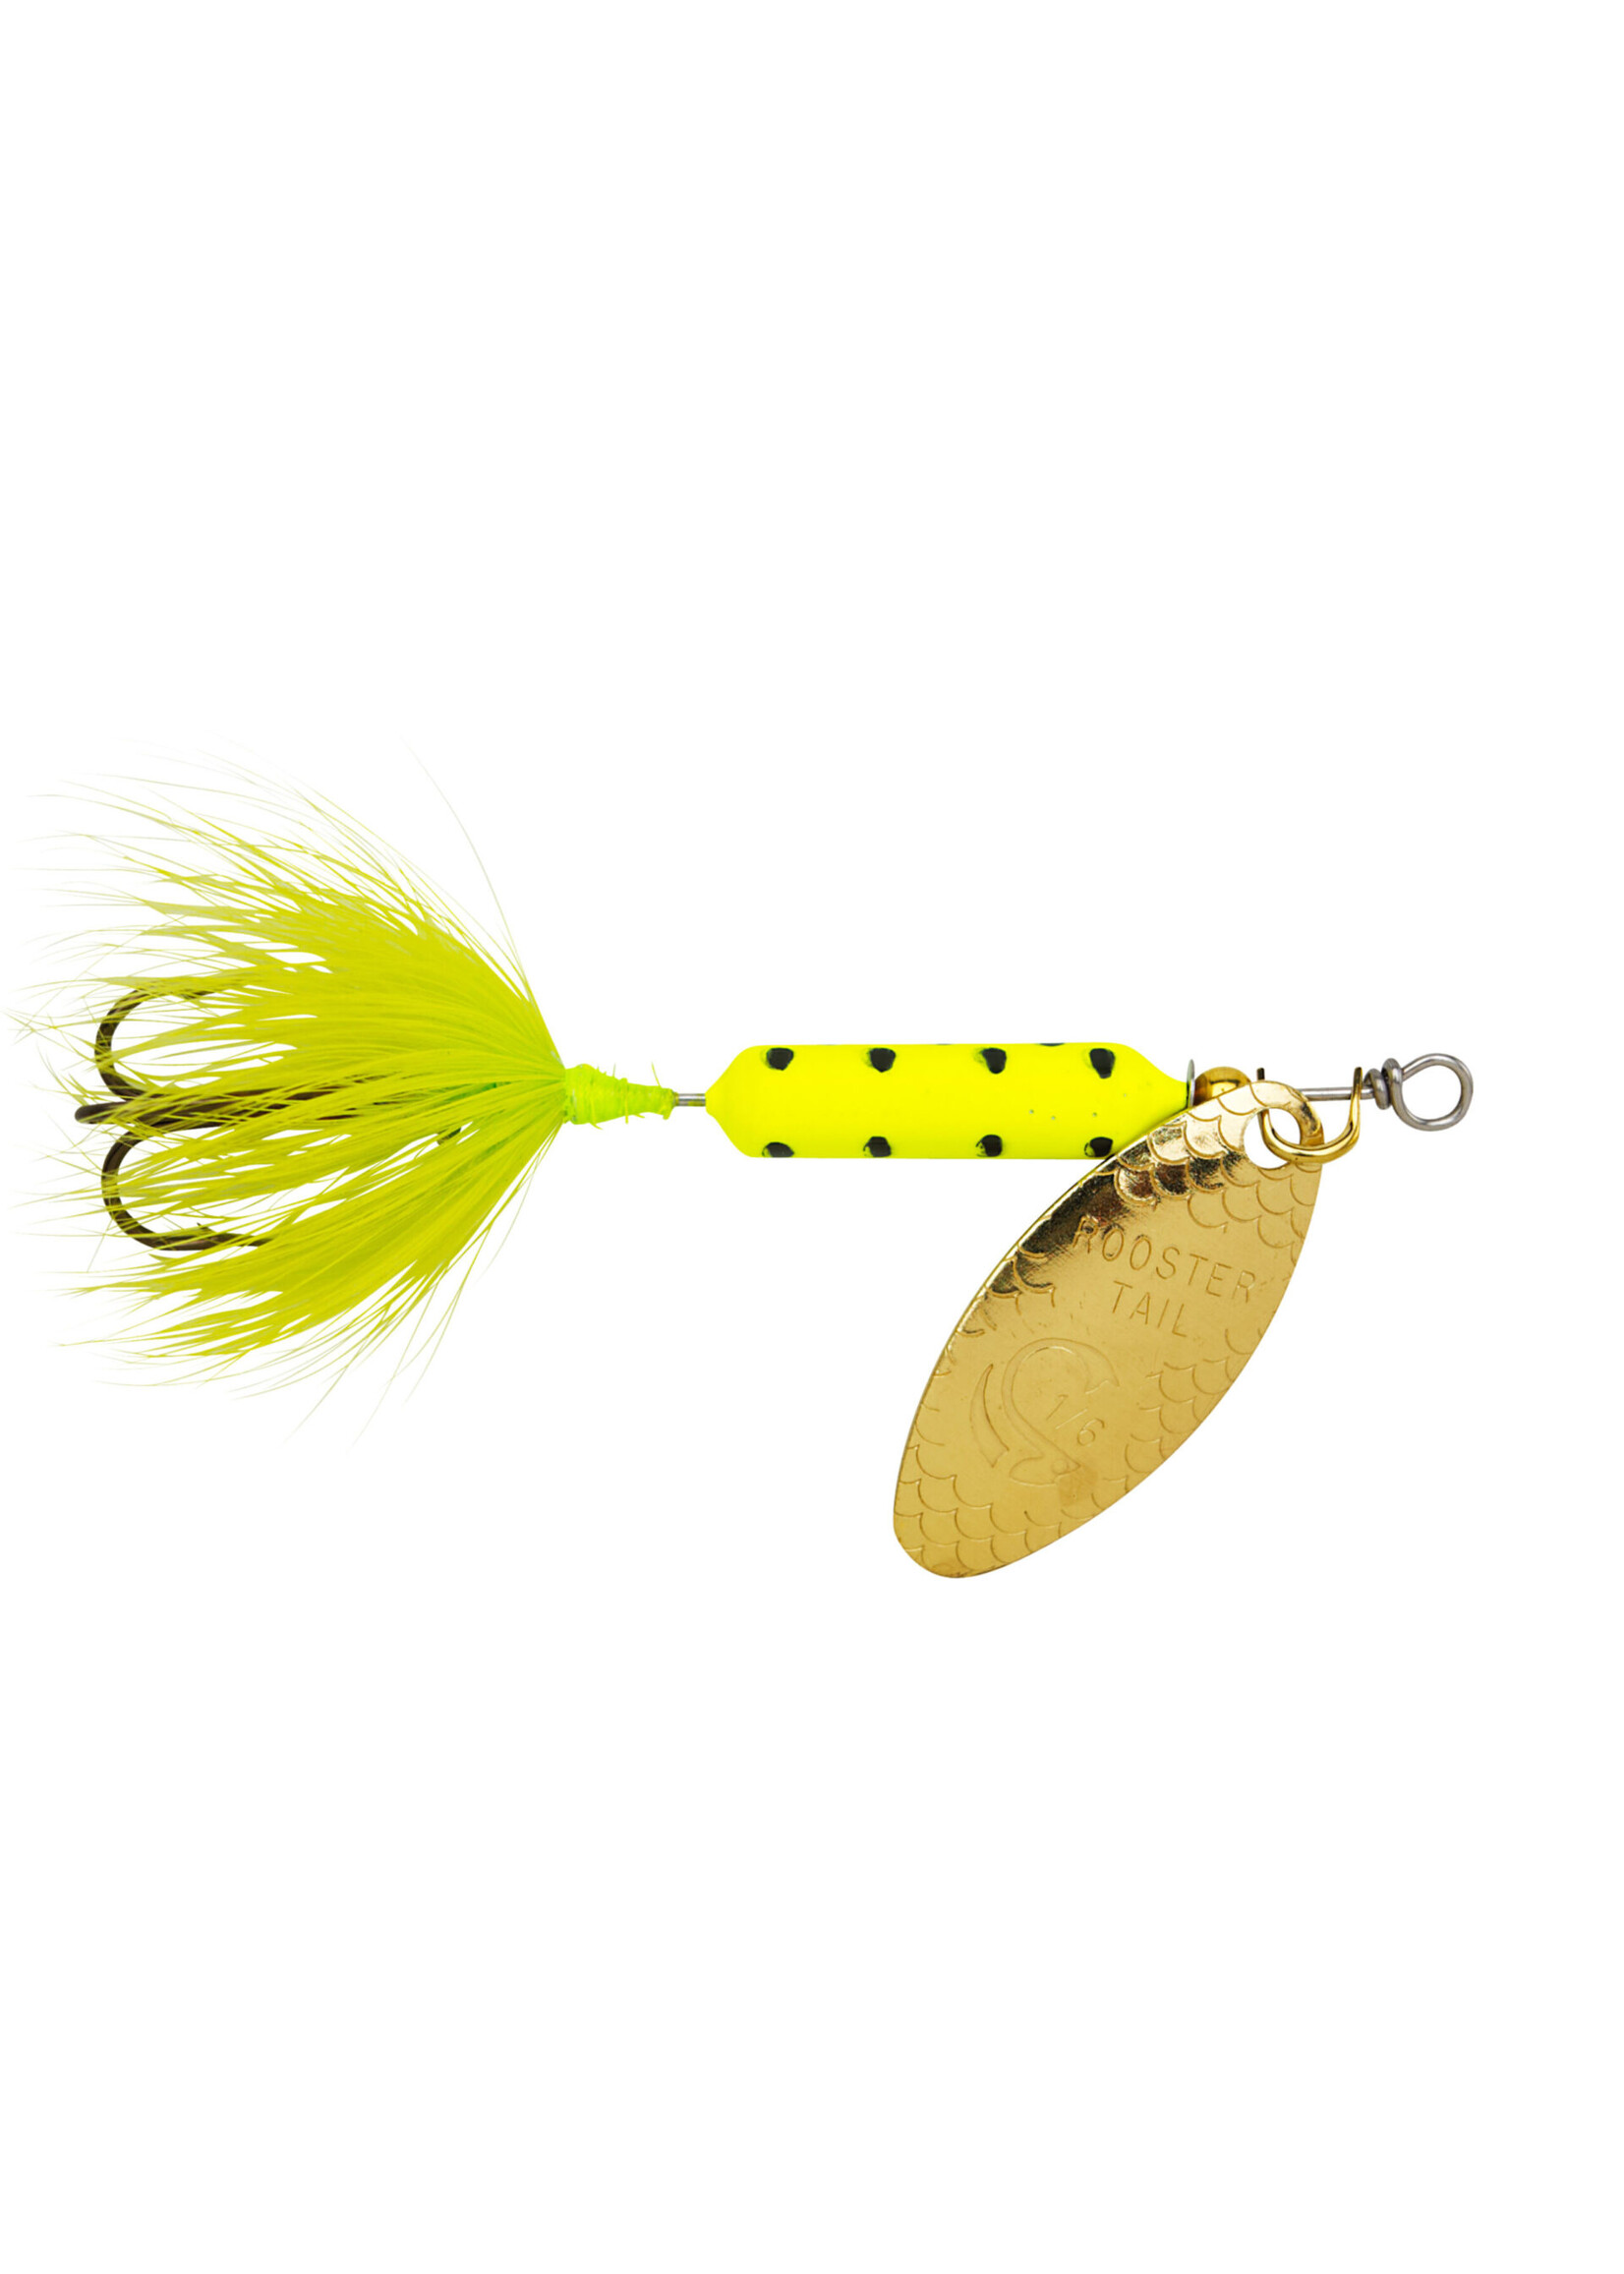 ROOSTER TAIL FISHING LURES